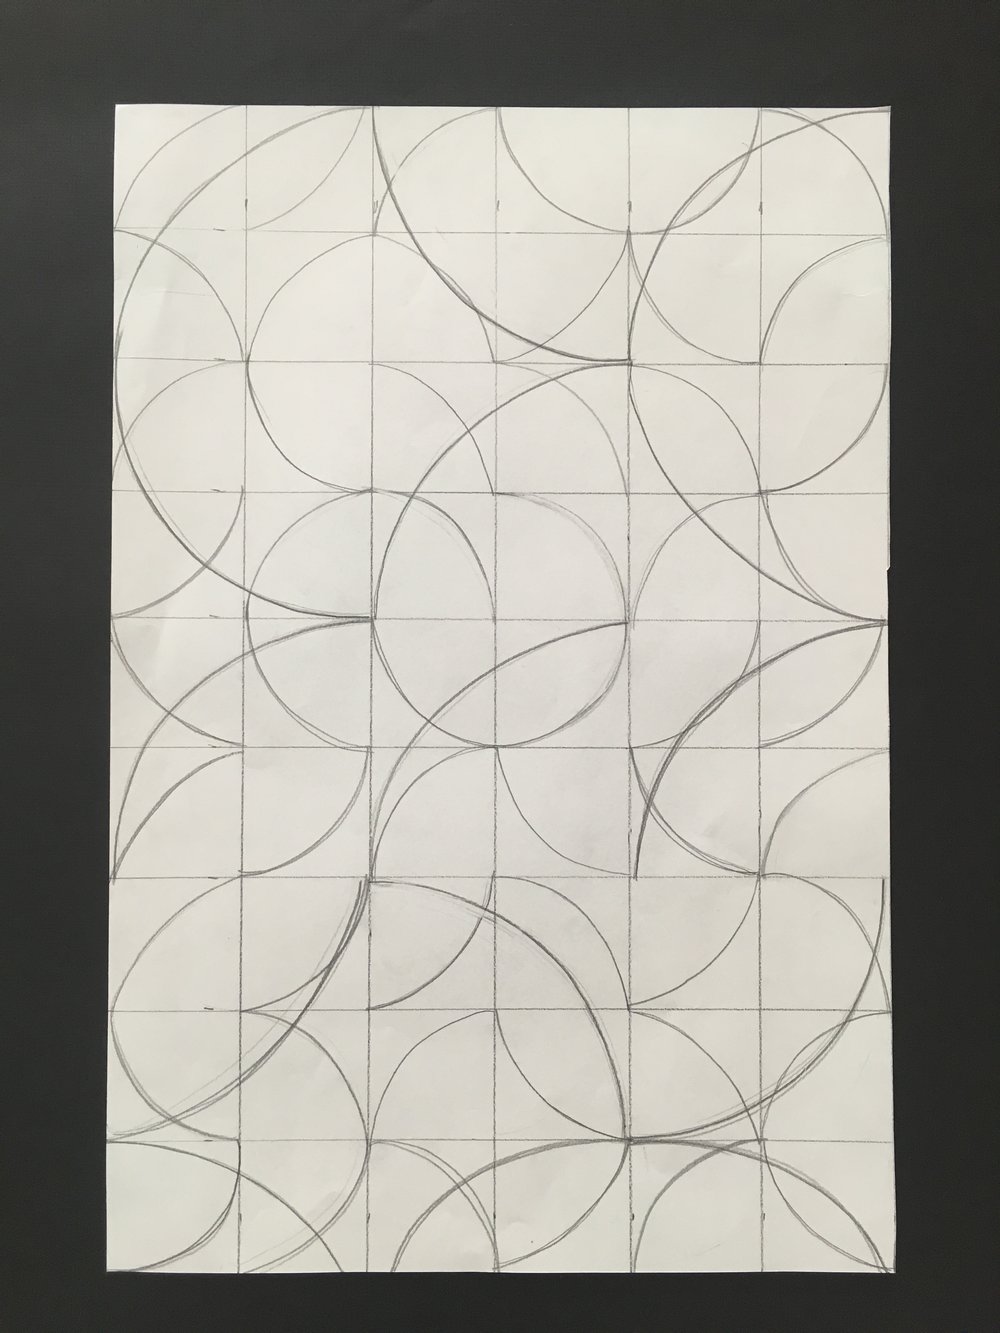  Grid-based abstraction using variations on a single stroke/line.&nbsp; 